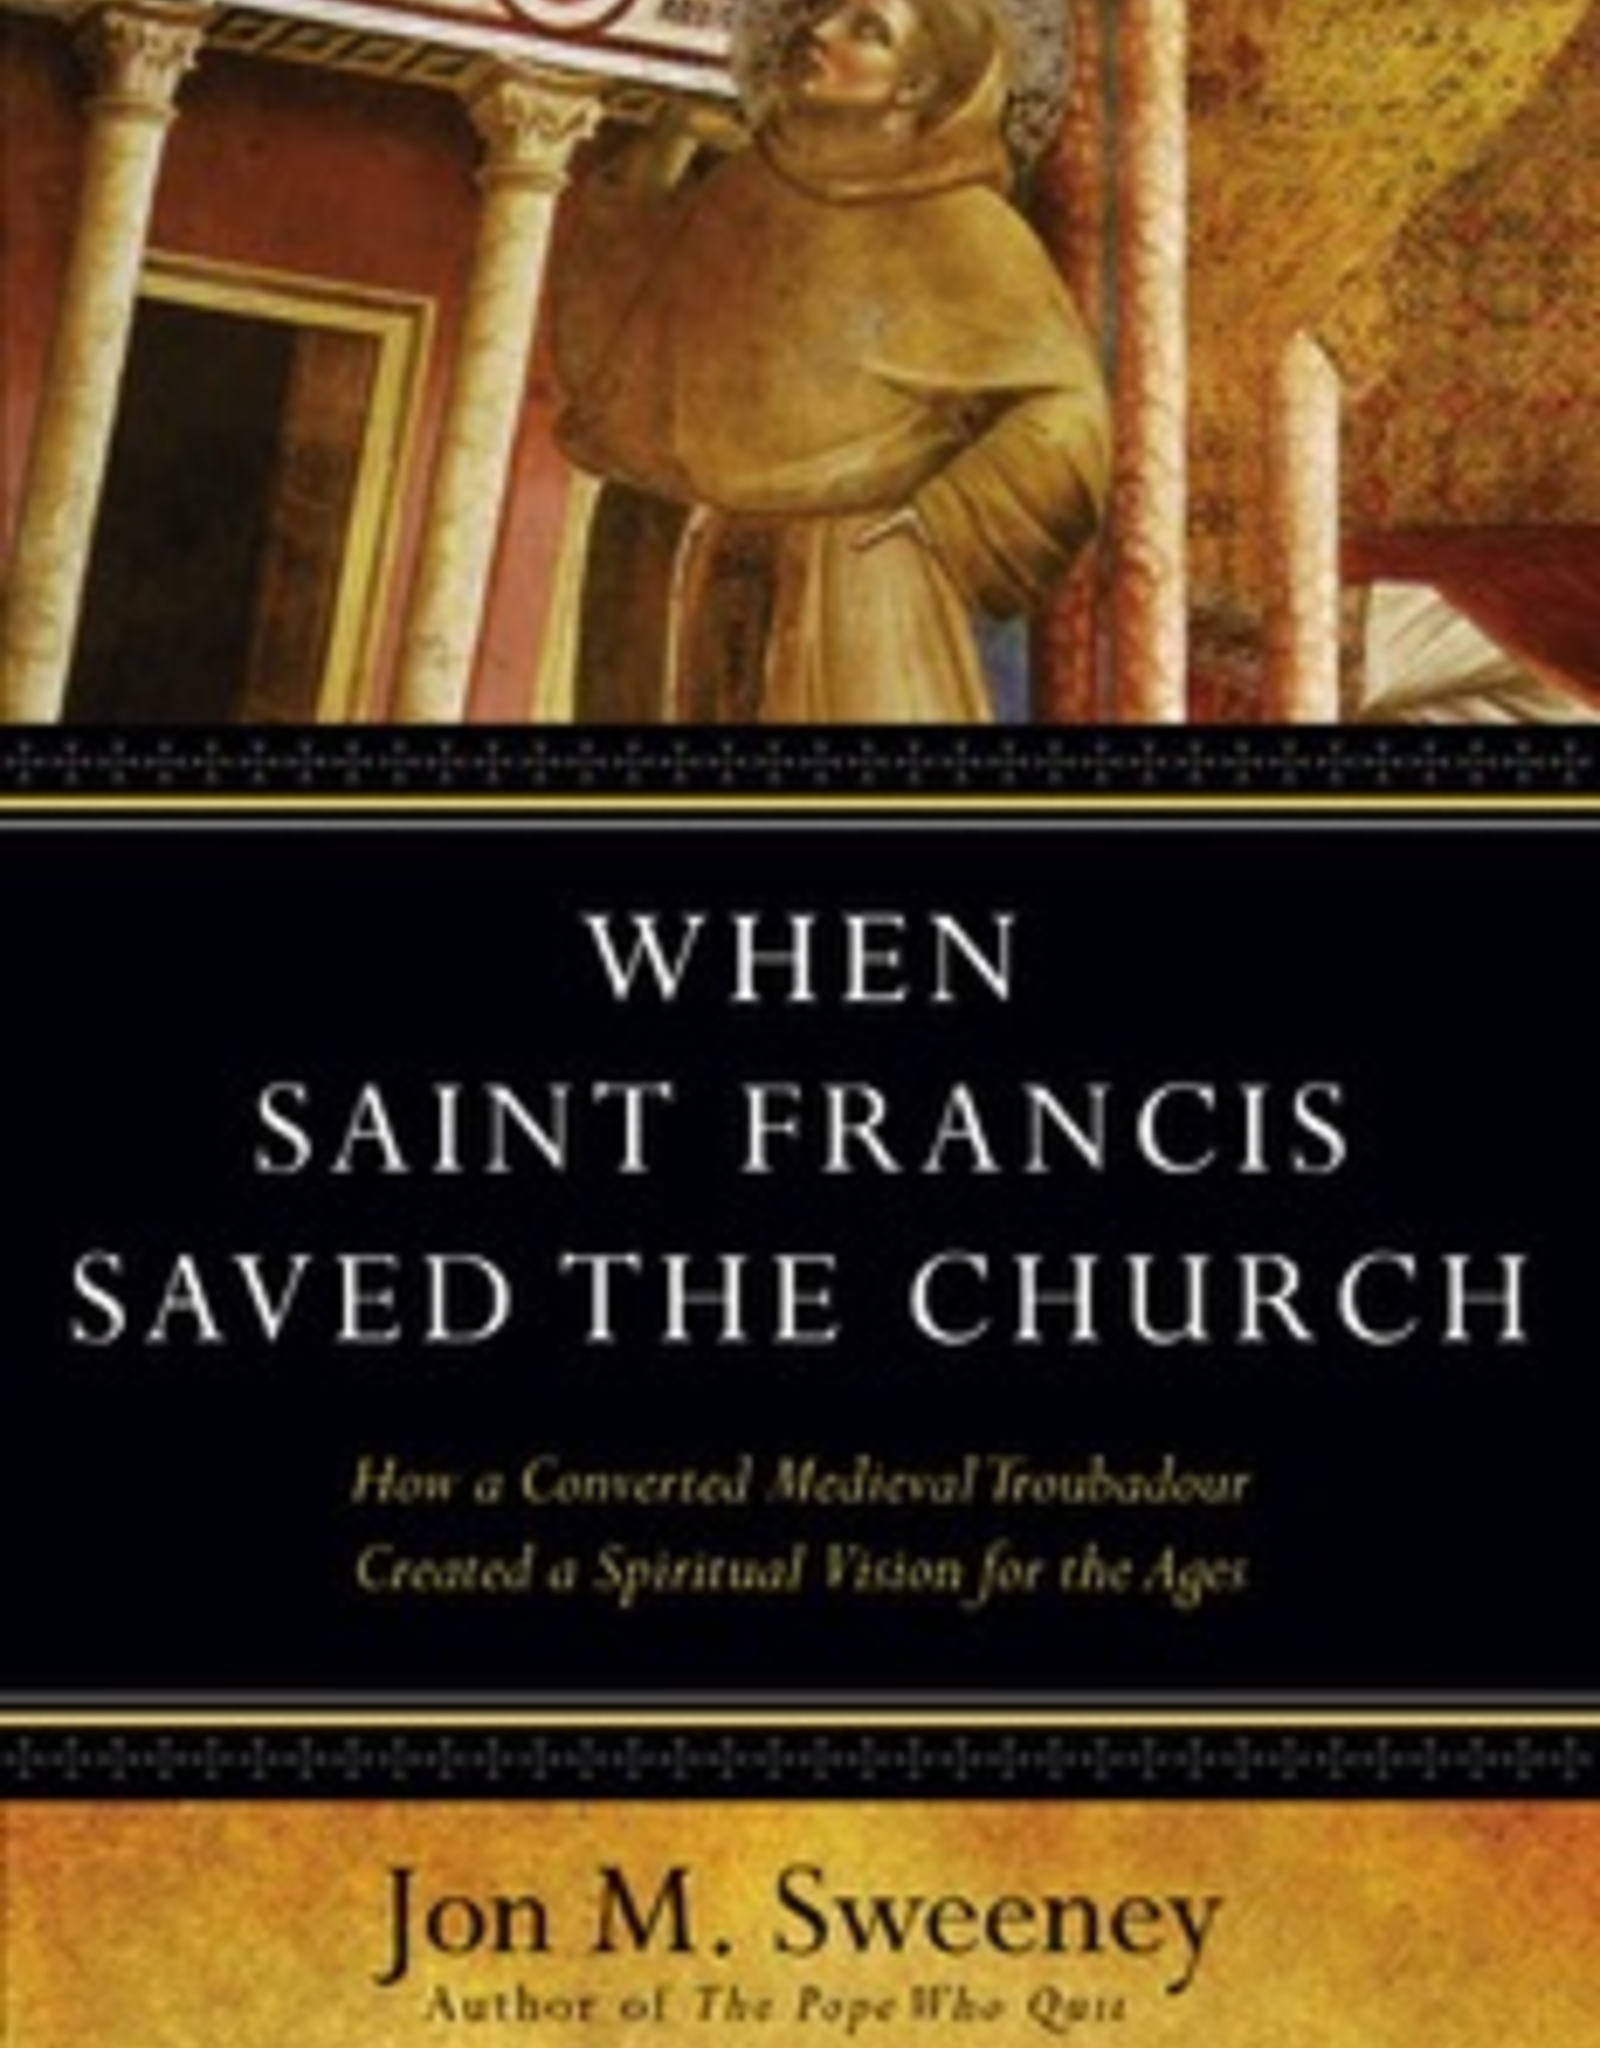 Ave Maria Press When Saint Francis Saved the Church:  How a Converted Medieval Troubadour Created a Spiritual Vision for the Ages, by Jon Sweeney (hardcover)